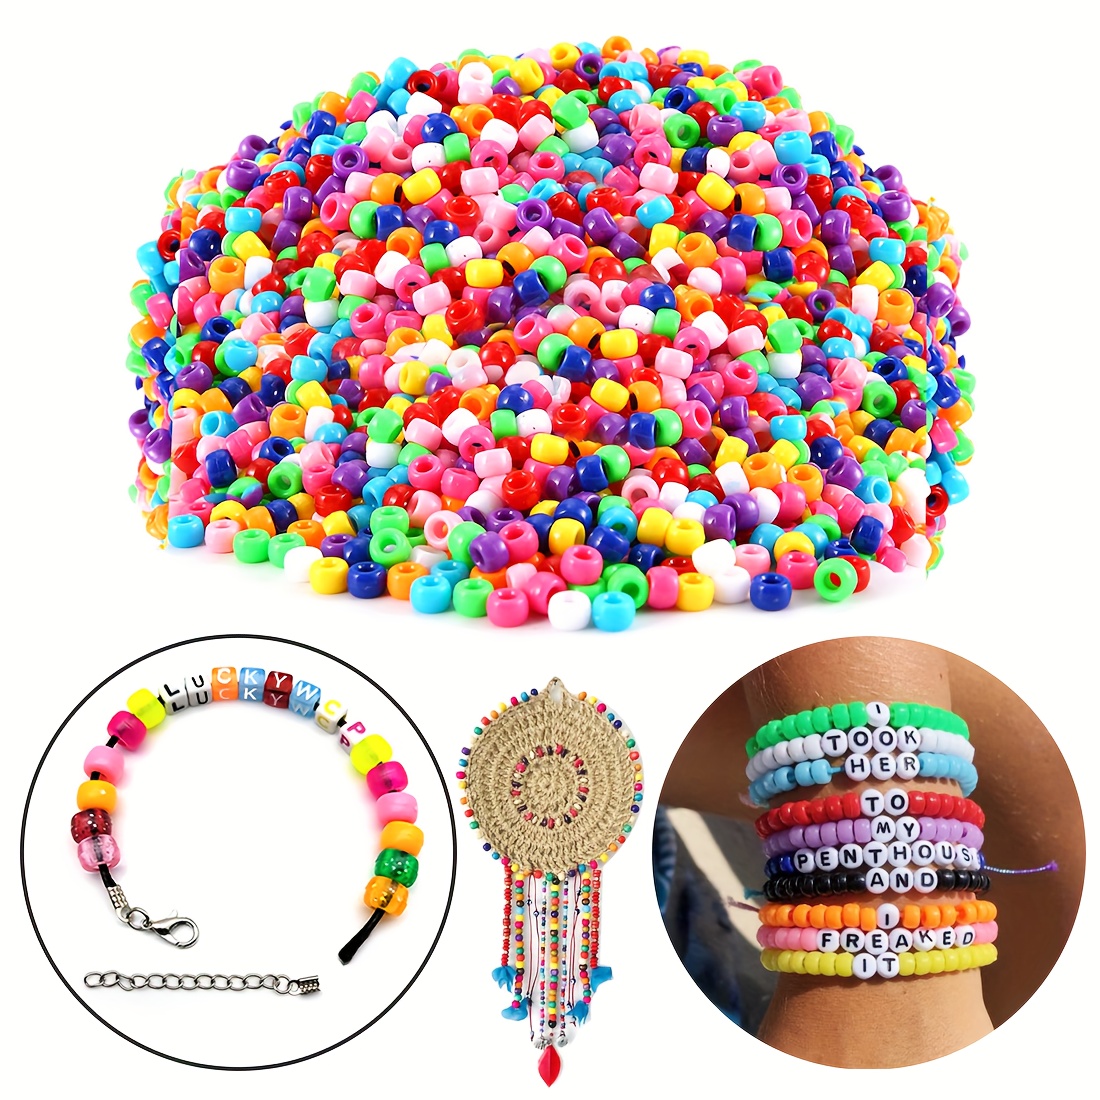  405 Pcs Hair Beads Kit for Girls Kids Hair Braids Including  200 Pieces 6x9mm Plastic Colorful Hair Beads 200 Pcs Elastic Rubber Bands 5  Pcs Quick Beader Hair Beads Set